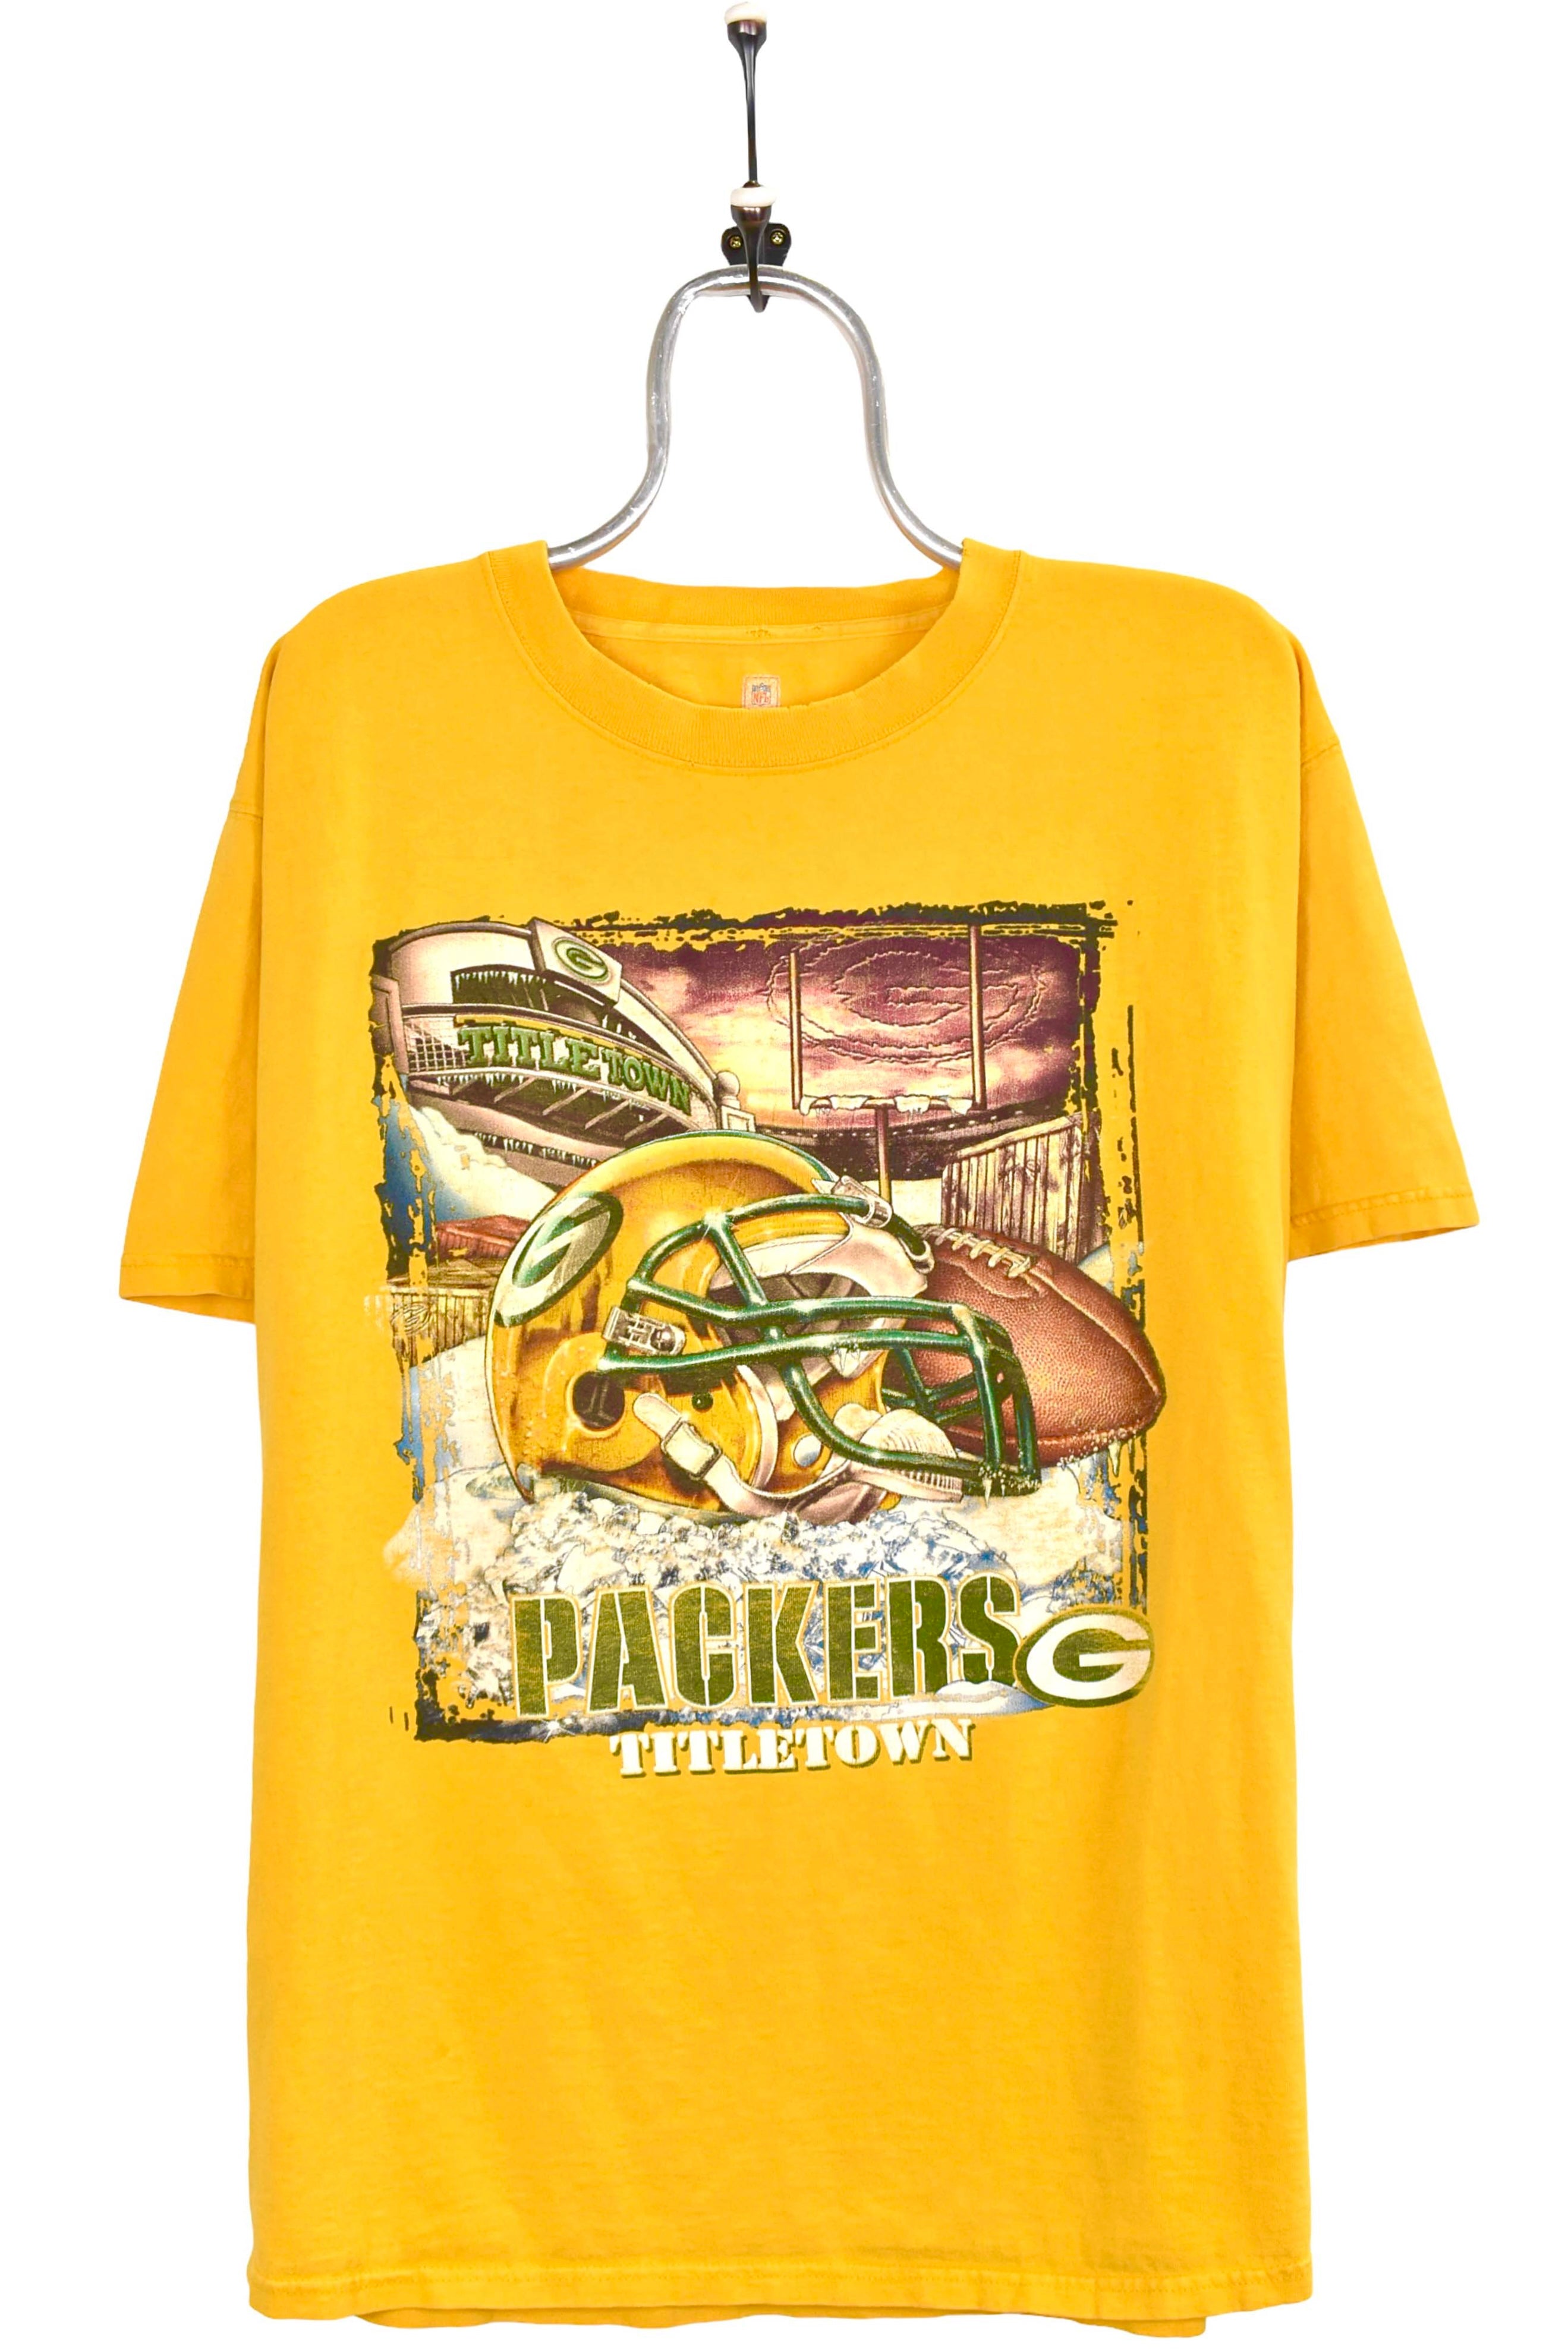 Vintage Green Bay Packers shirt, yellow NFL graphic tee - Large